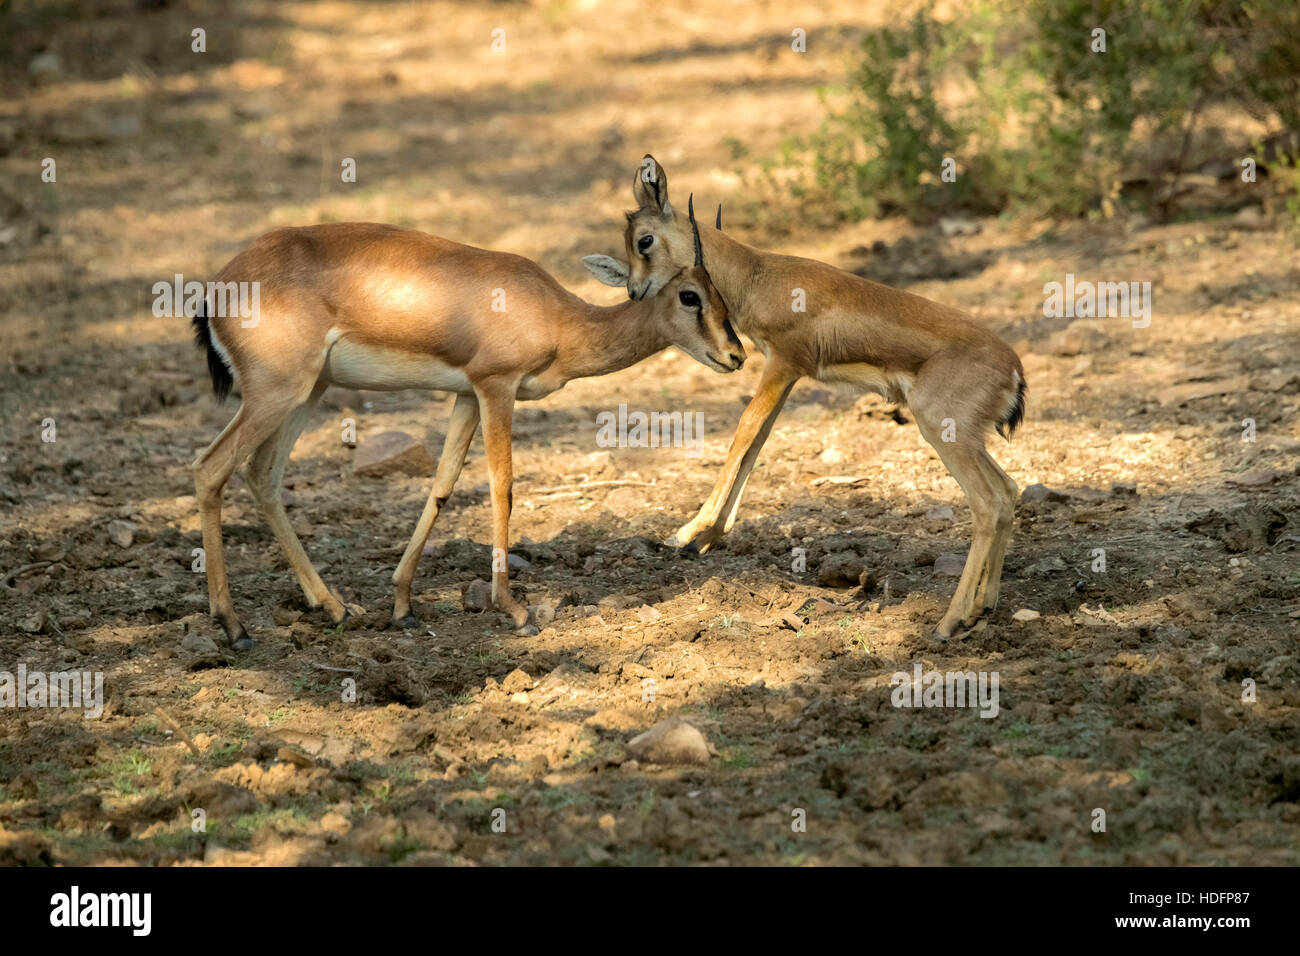 The mother and child, The chinkara, also known as the Indian gazelle, Stock Photo